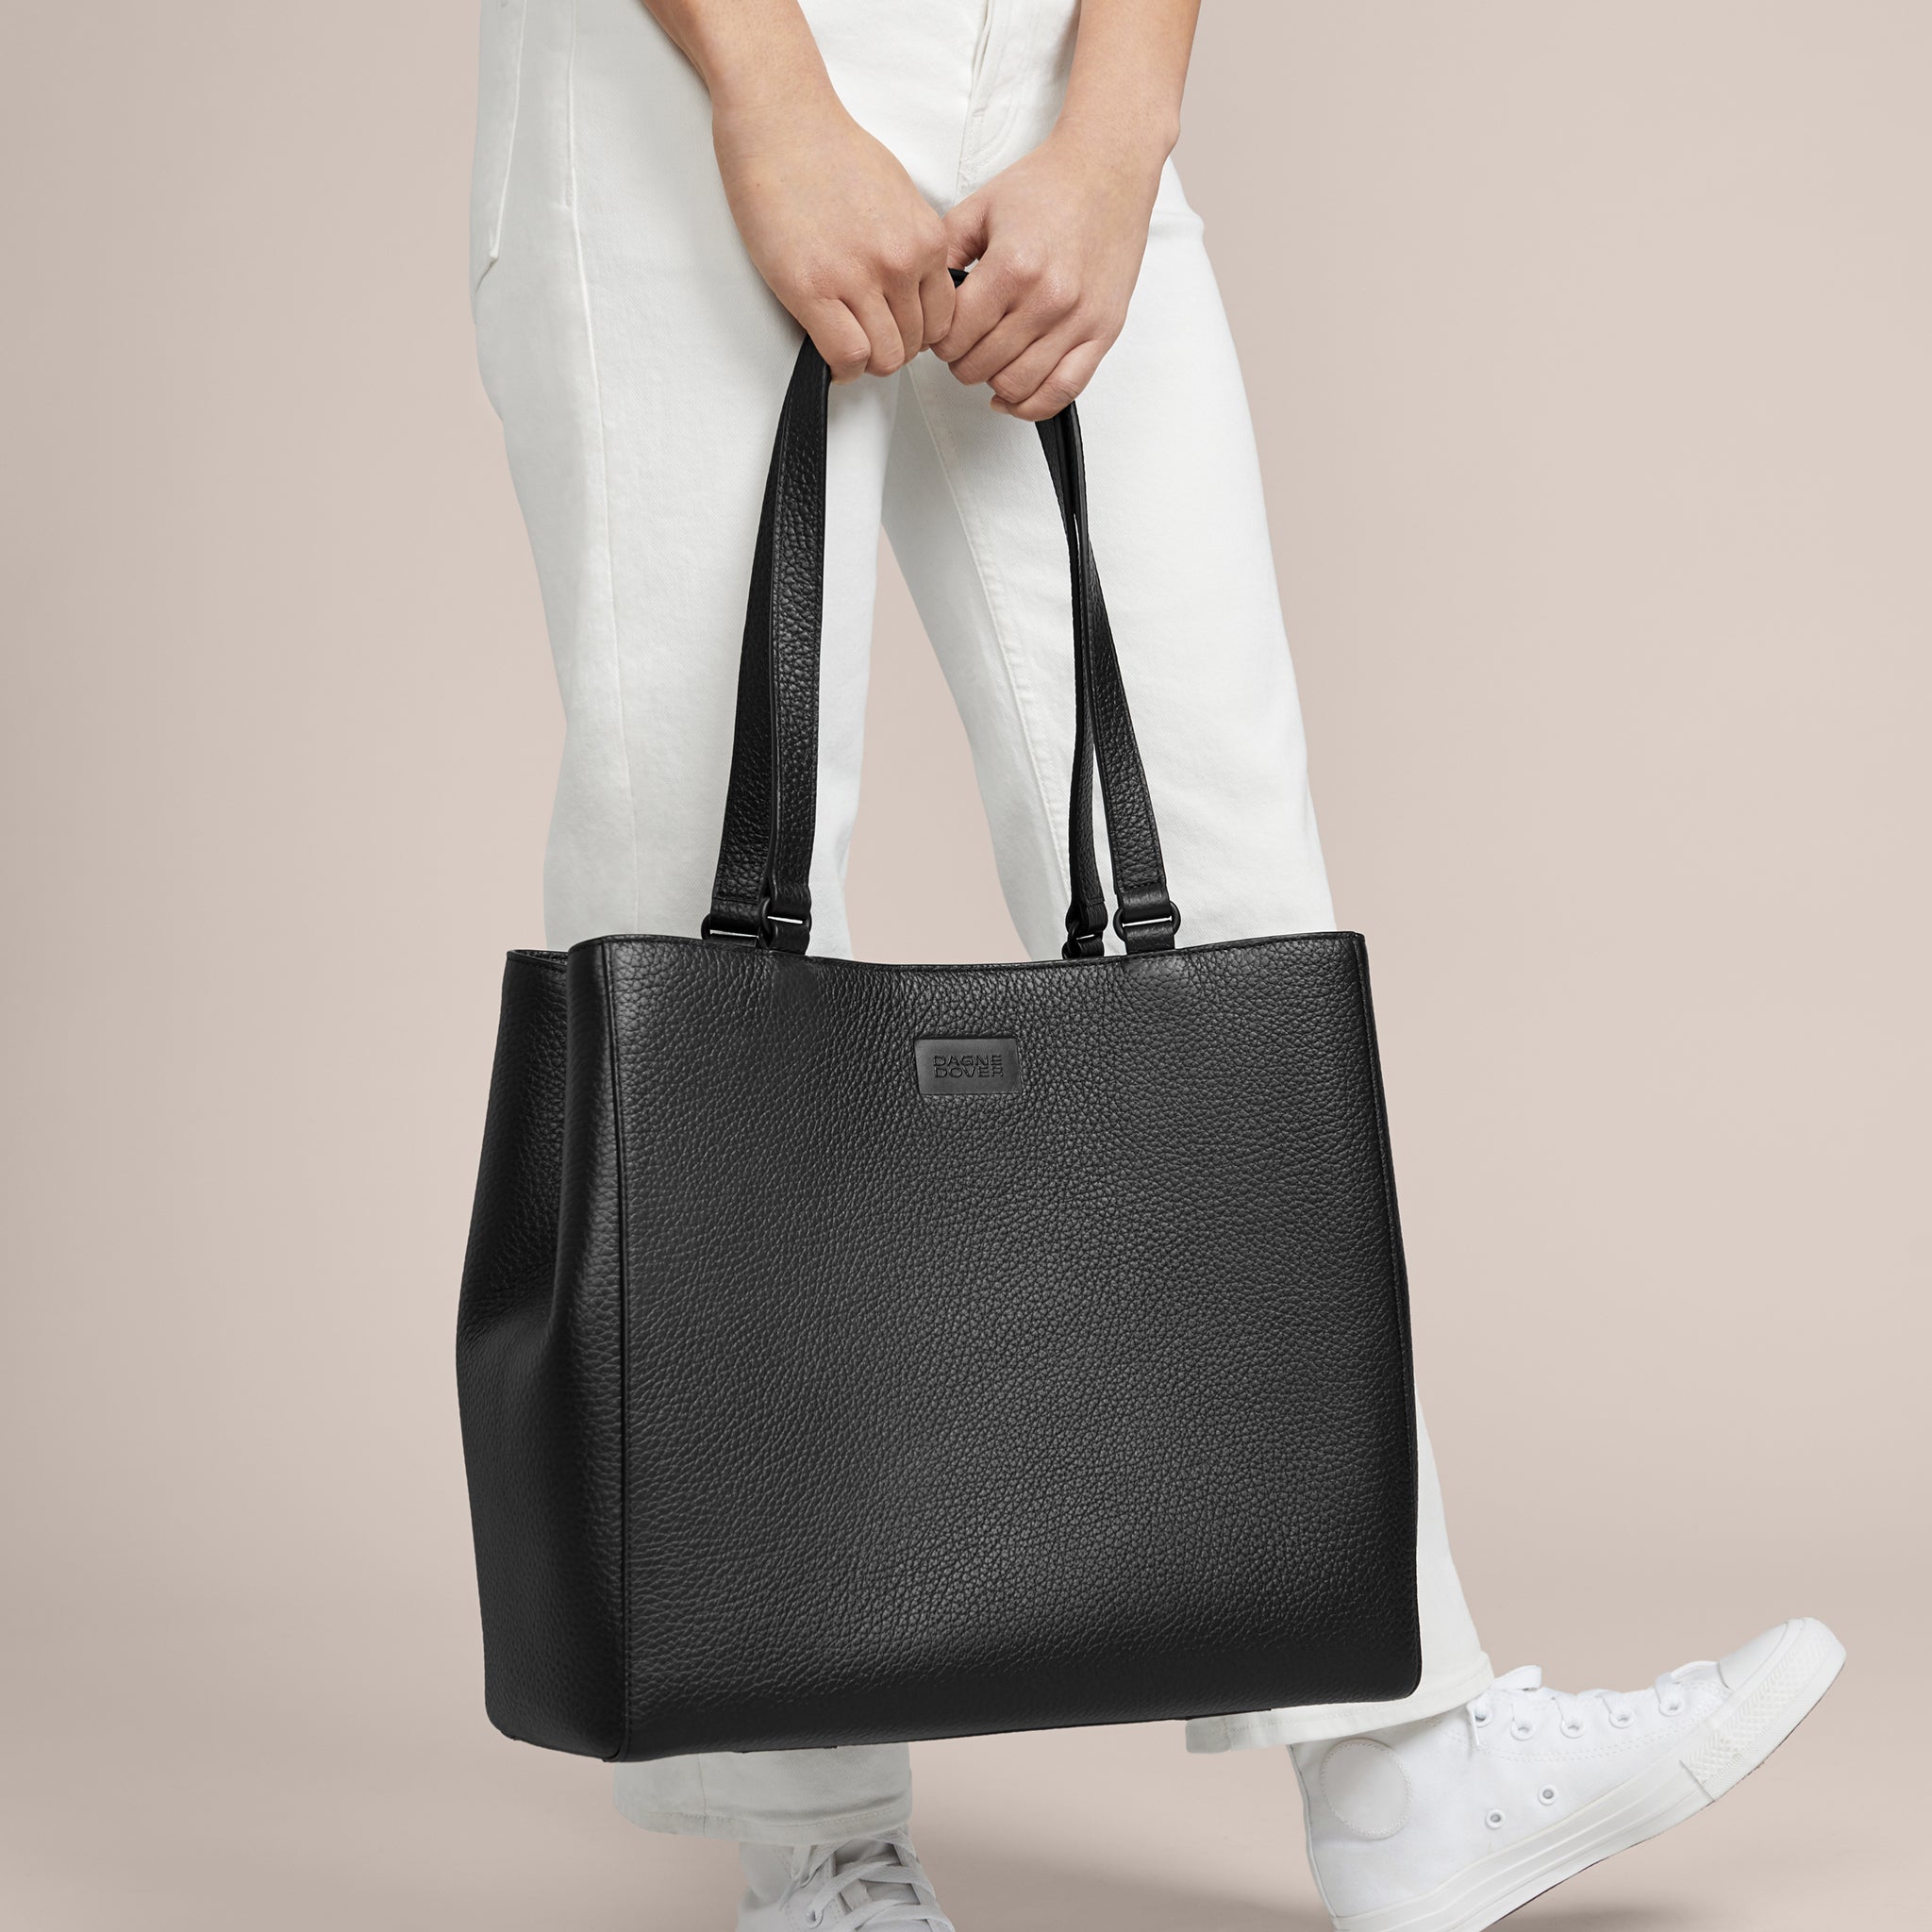 Urban Tote | Leather Bags for Women | Urban Southern